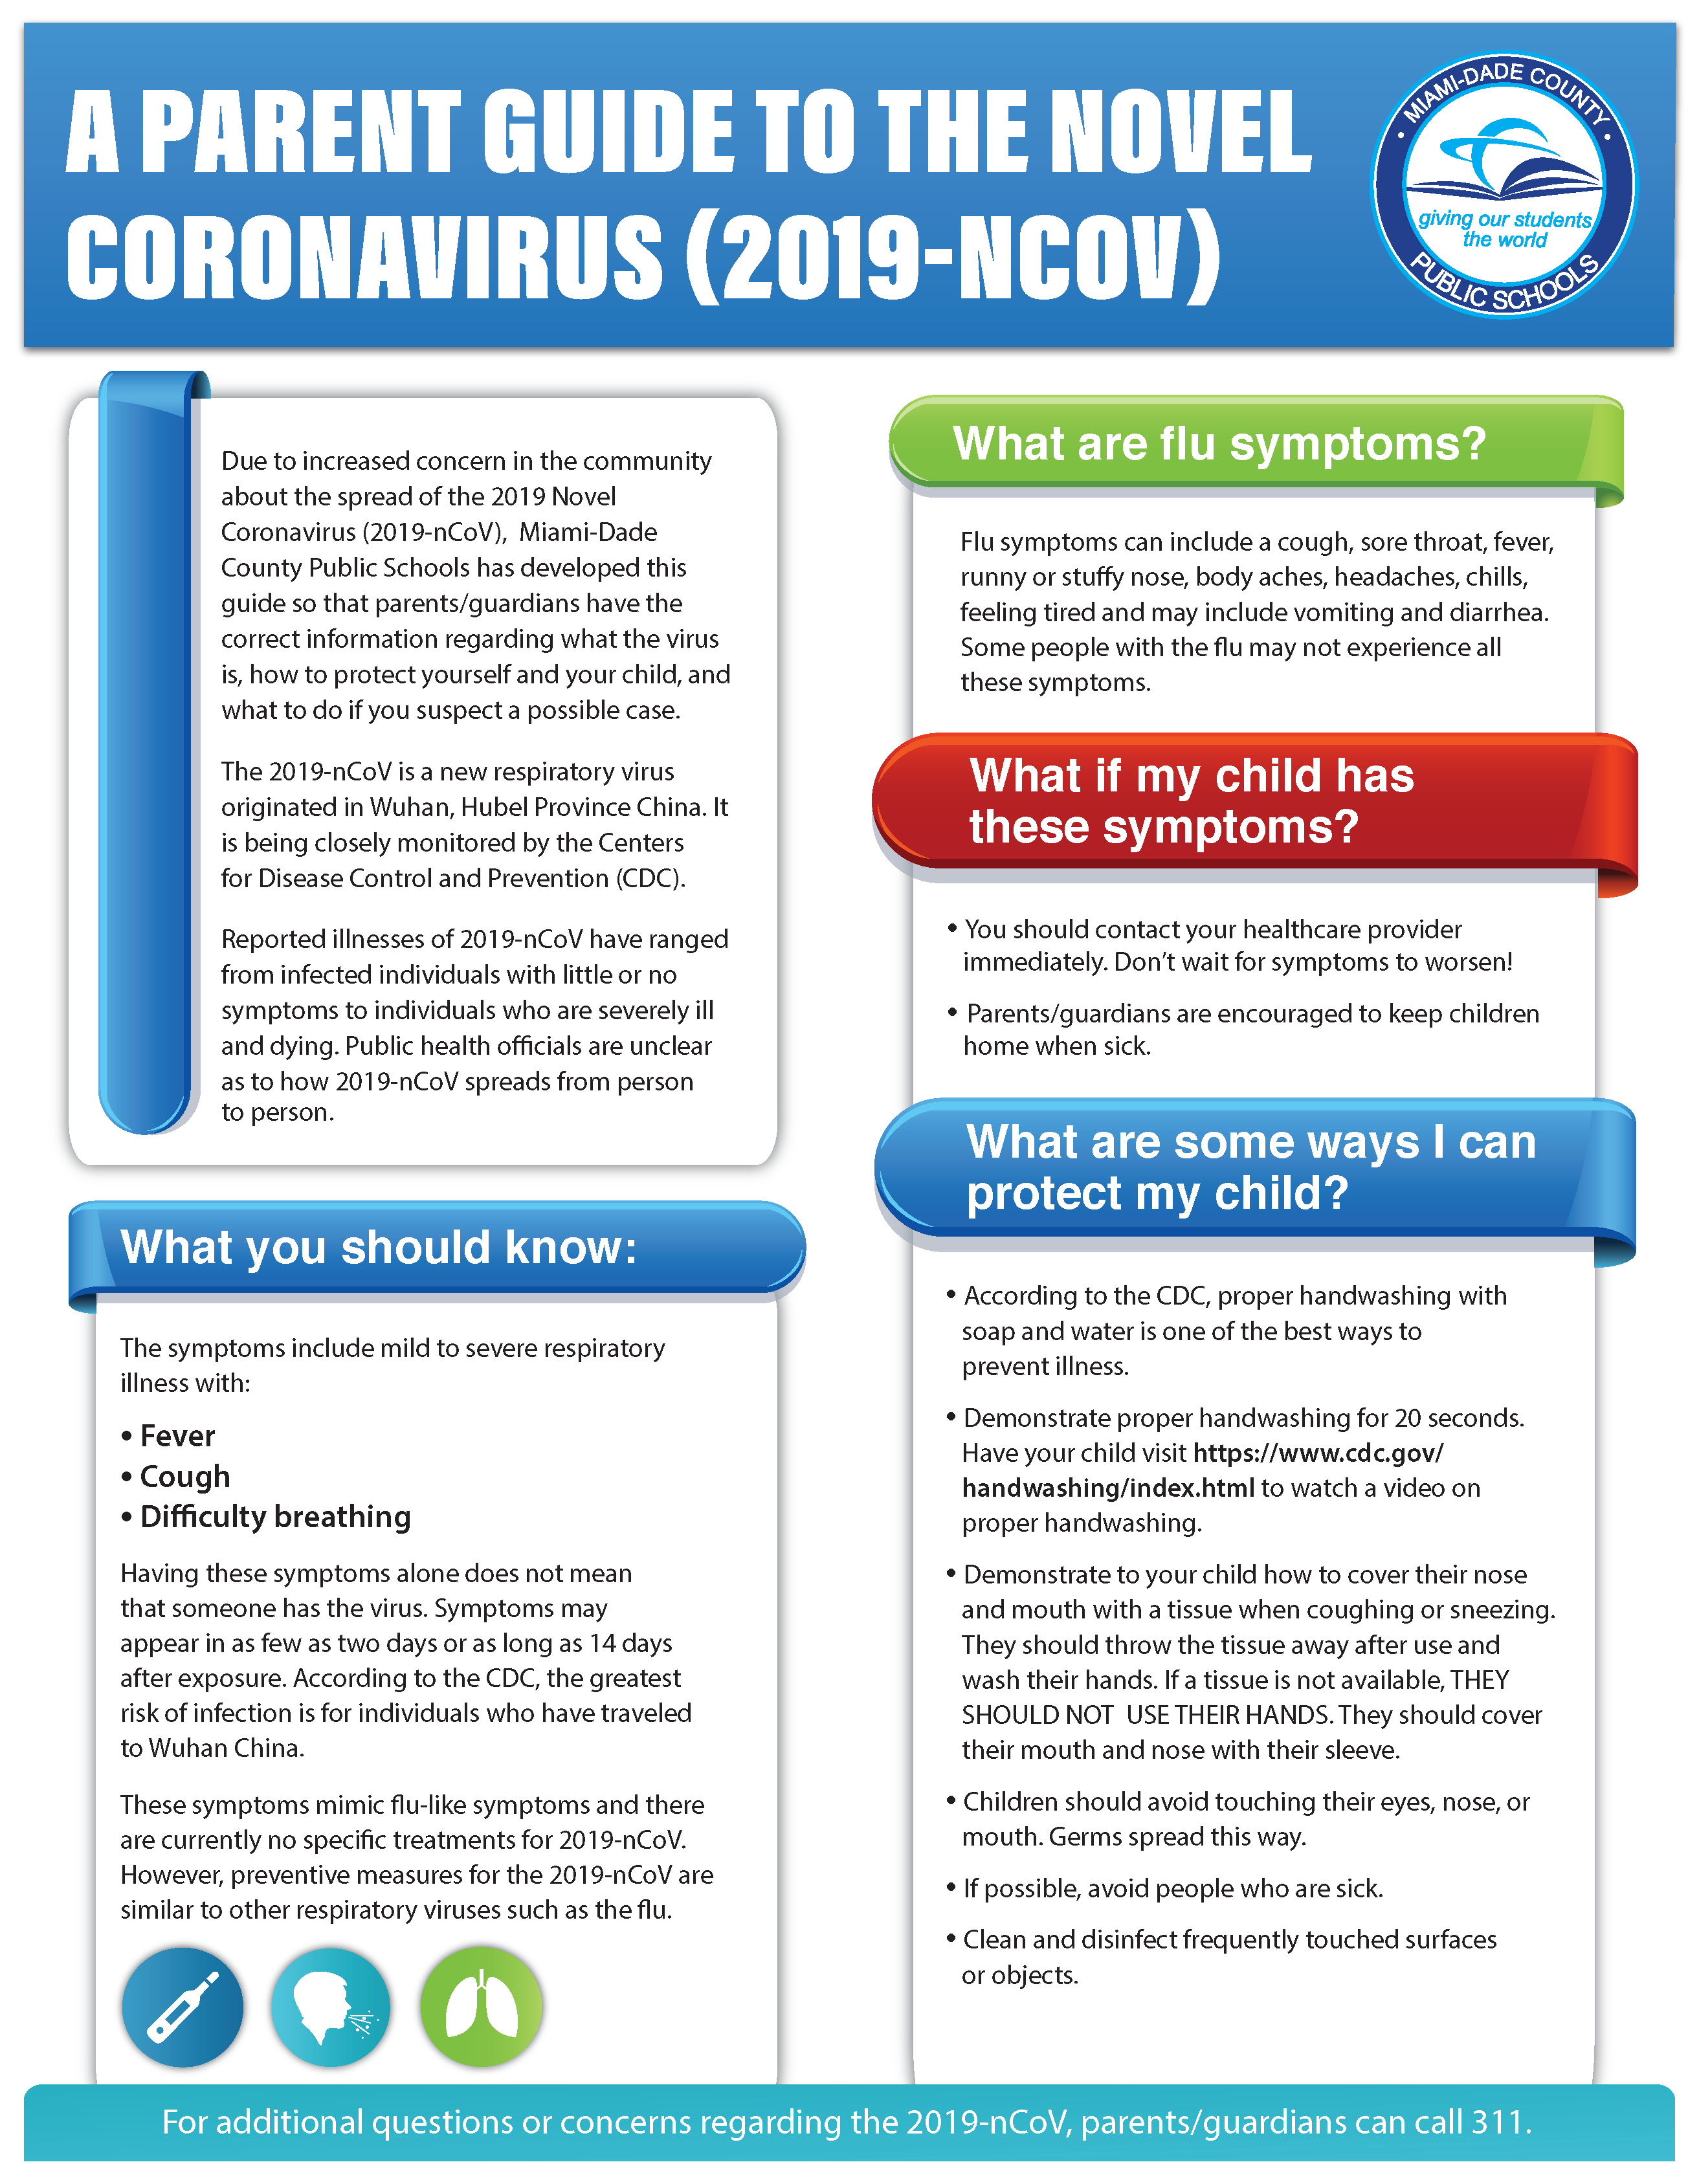 A Parents Guide to the 2019-NCoronavirus